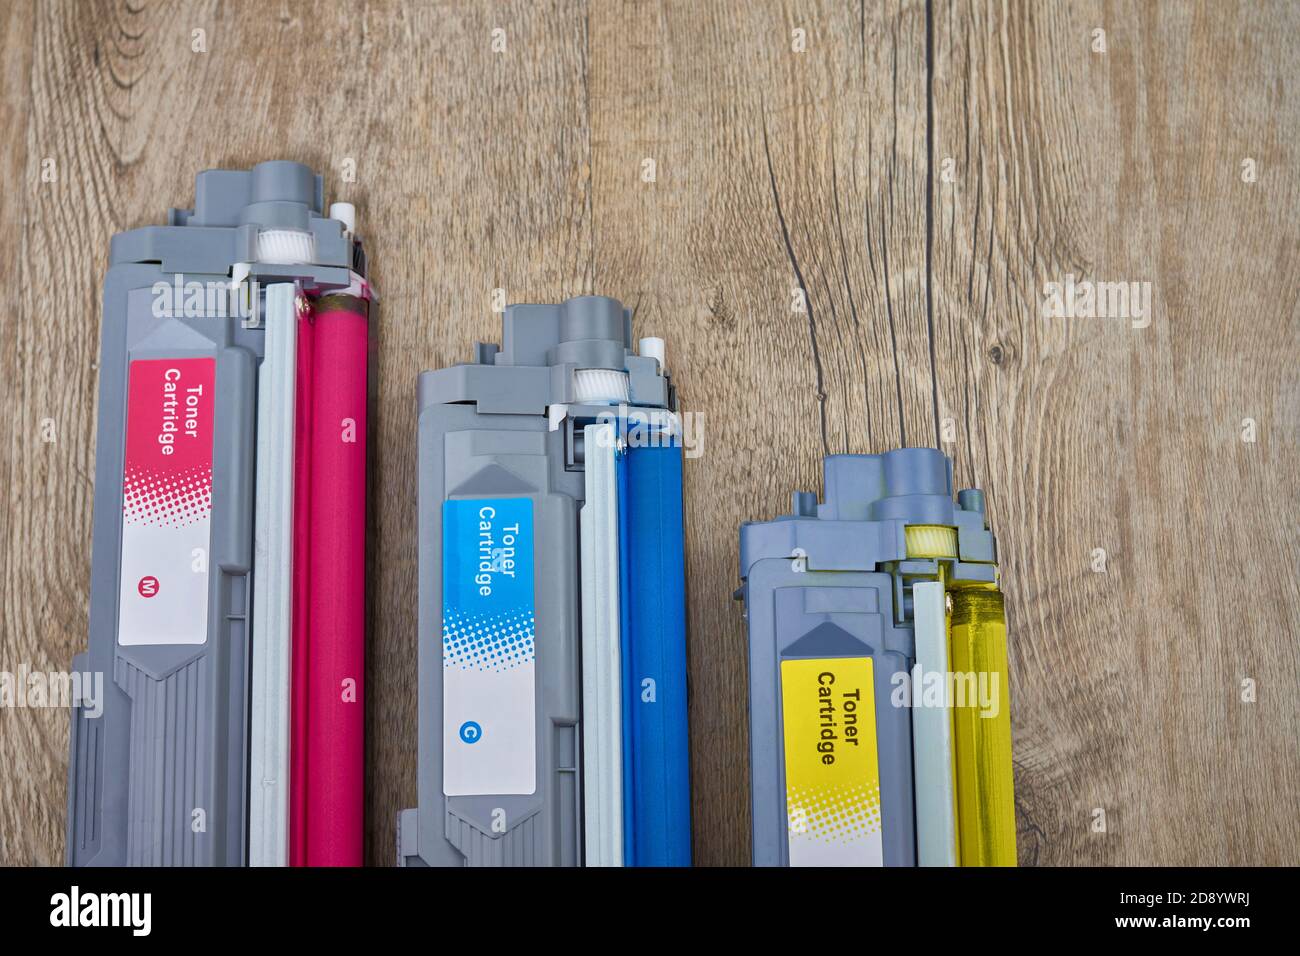 Toner cartridges for color laser printer. Magenta, cyan and yellow Stock Photo